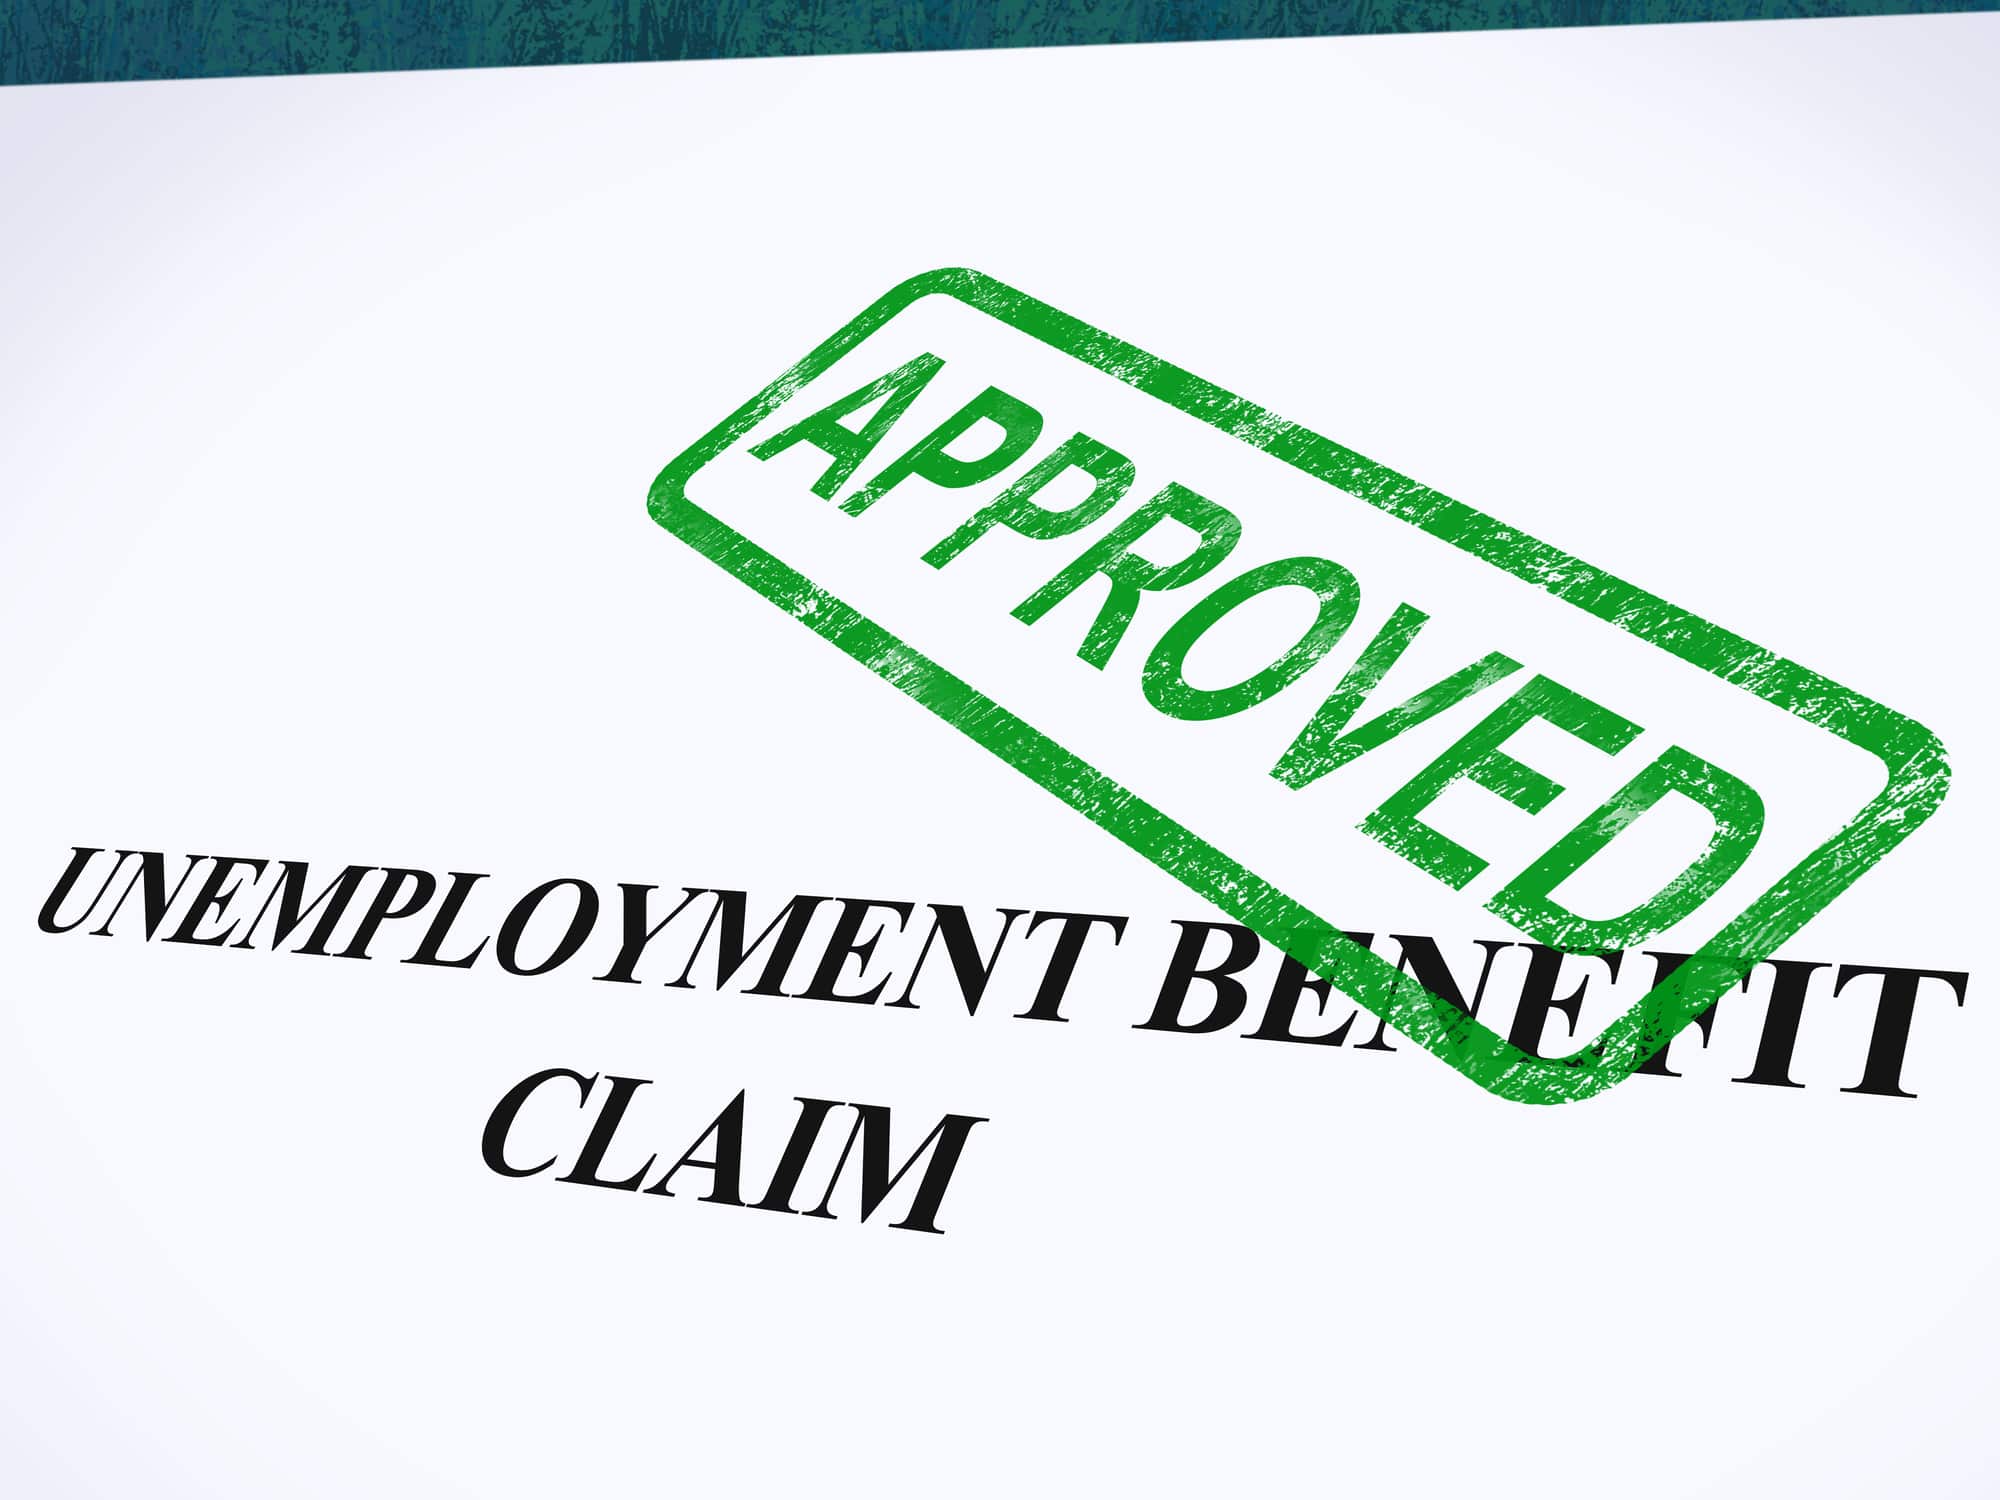 Are You Eligible for Unemployment Benefits in Denmark?